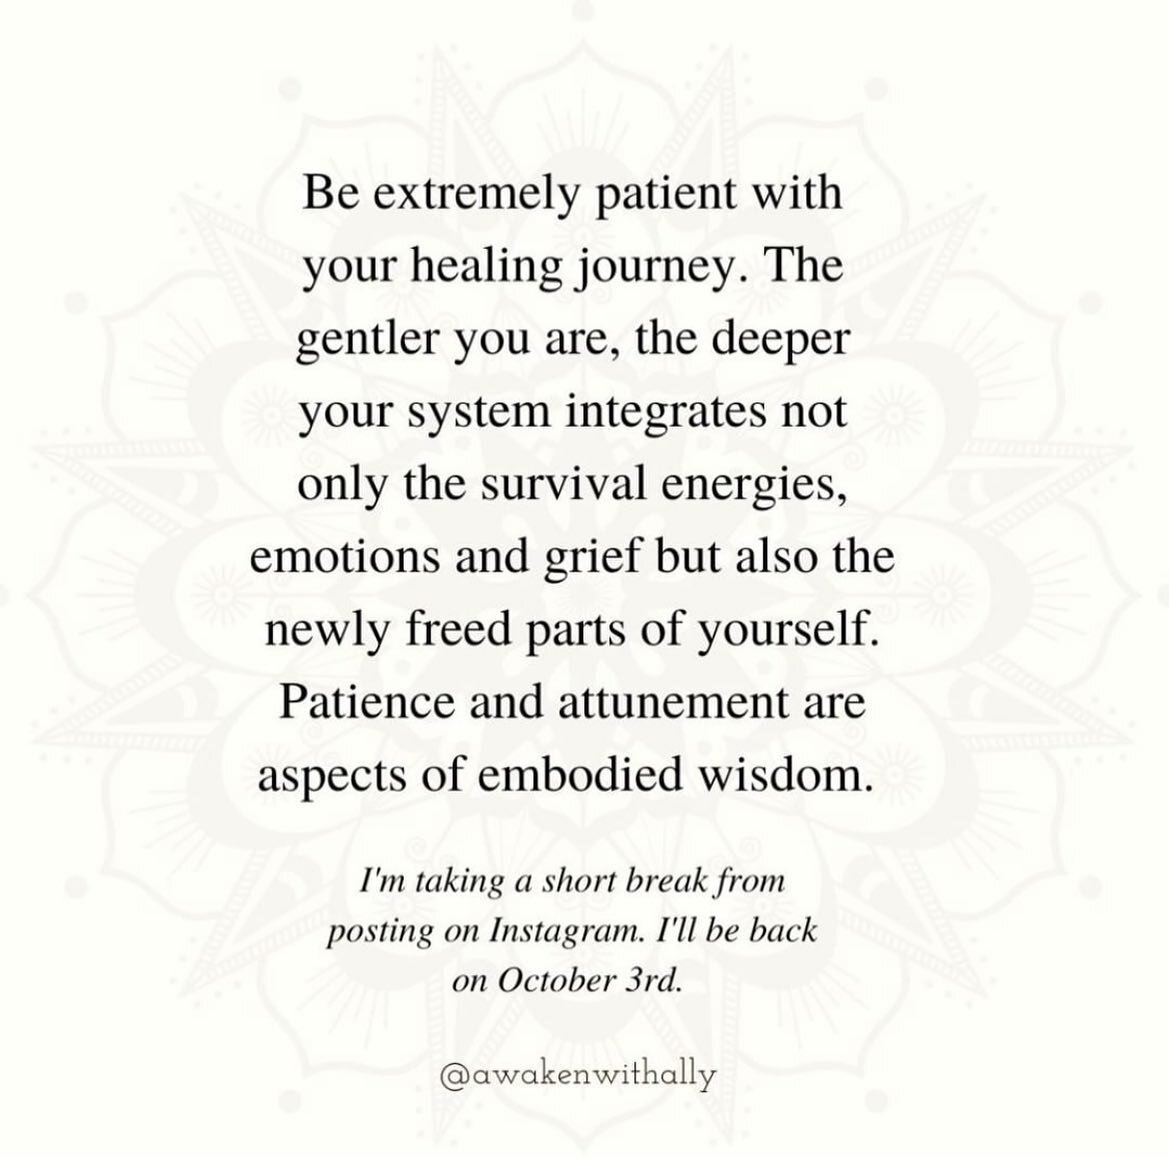 important reminder from @awakenwithally 

When it comes to trauma healing, the &quot;work&quot; is gentler, softer, smaller, non-linear and needs more attunement, regulation, inner connection and more skill to ride the waves of life, inner and outer.